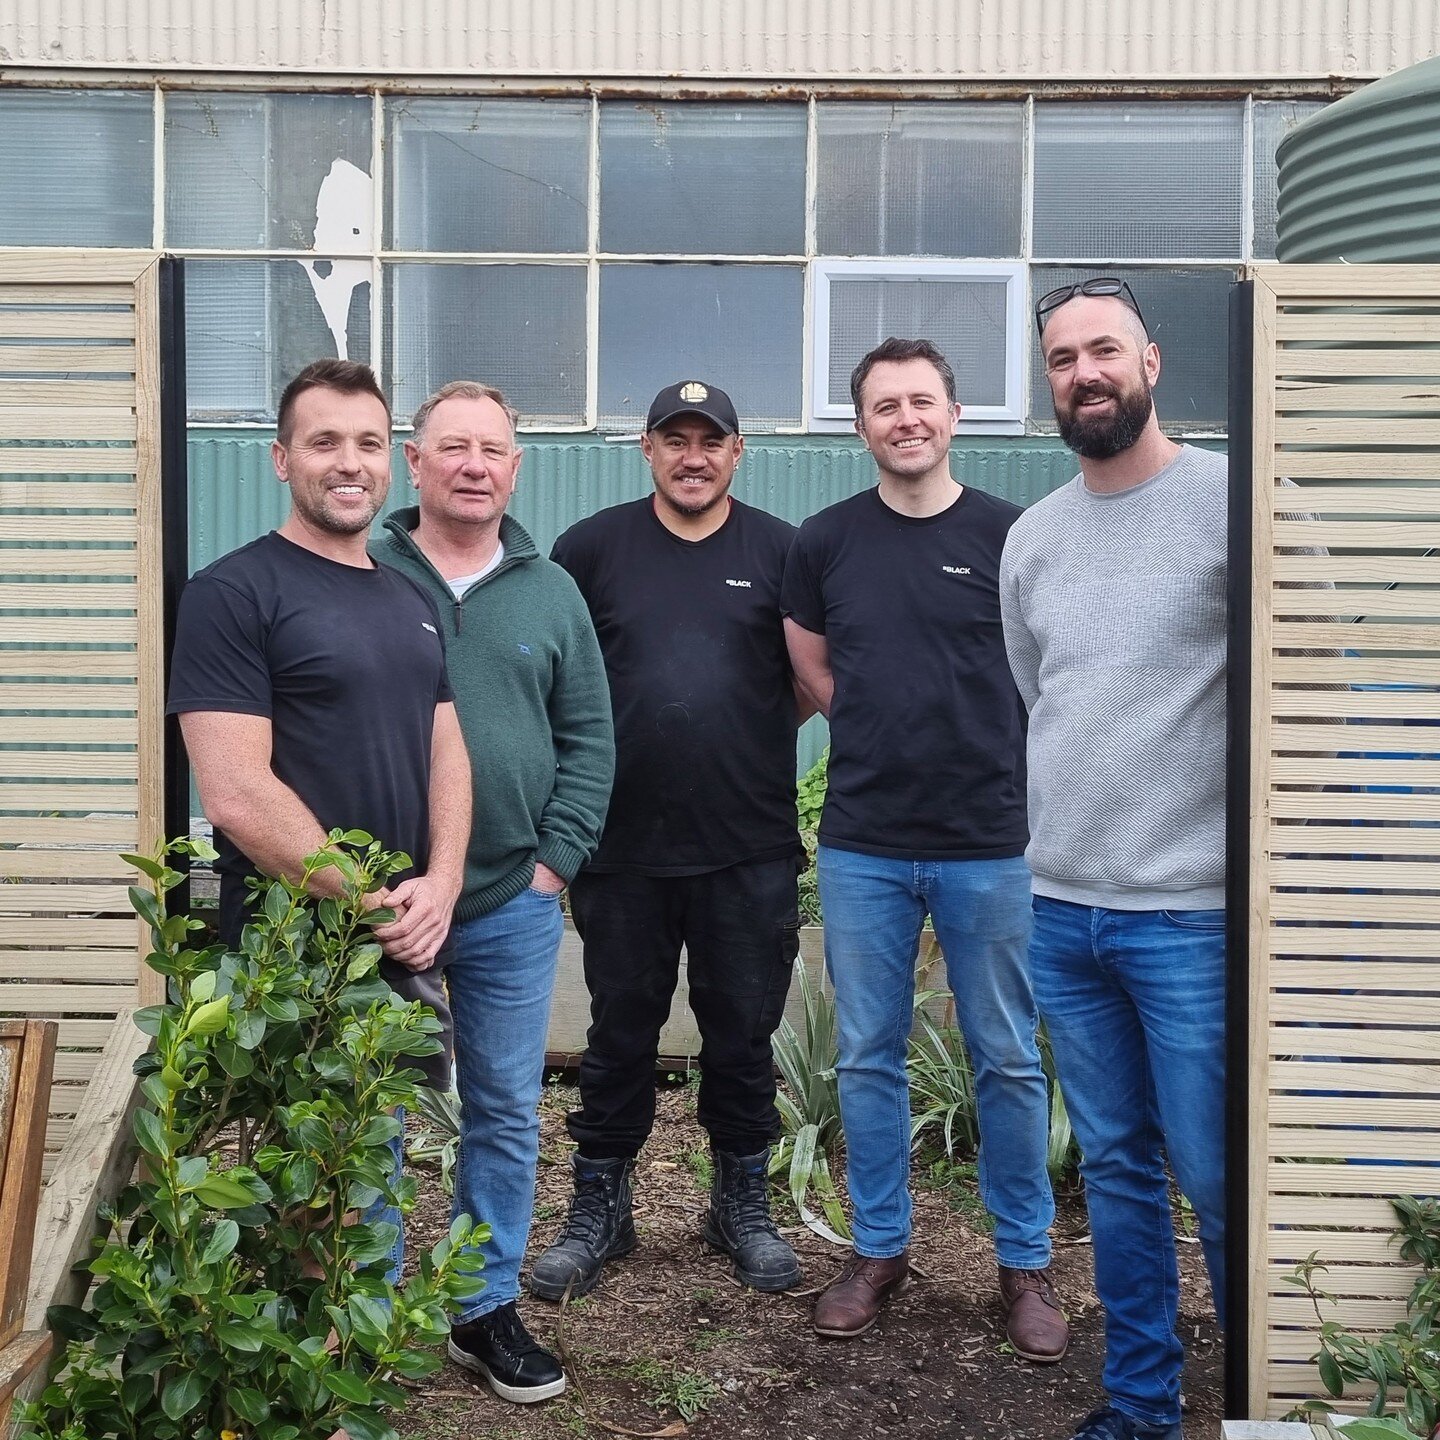 #COMMUNITY 🤝 The Wellington team were back at the @compassionsoupkitchen last week where they got stuck into food preparation, packing food parcels, and building a fence for the community garden. Despite shedding a few tears while cutting a large st